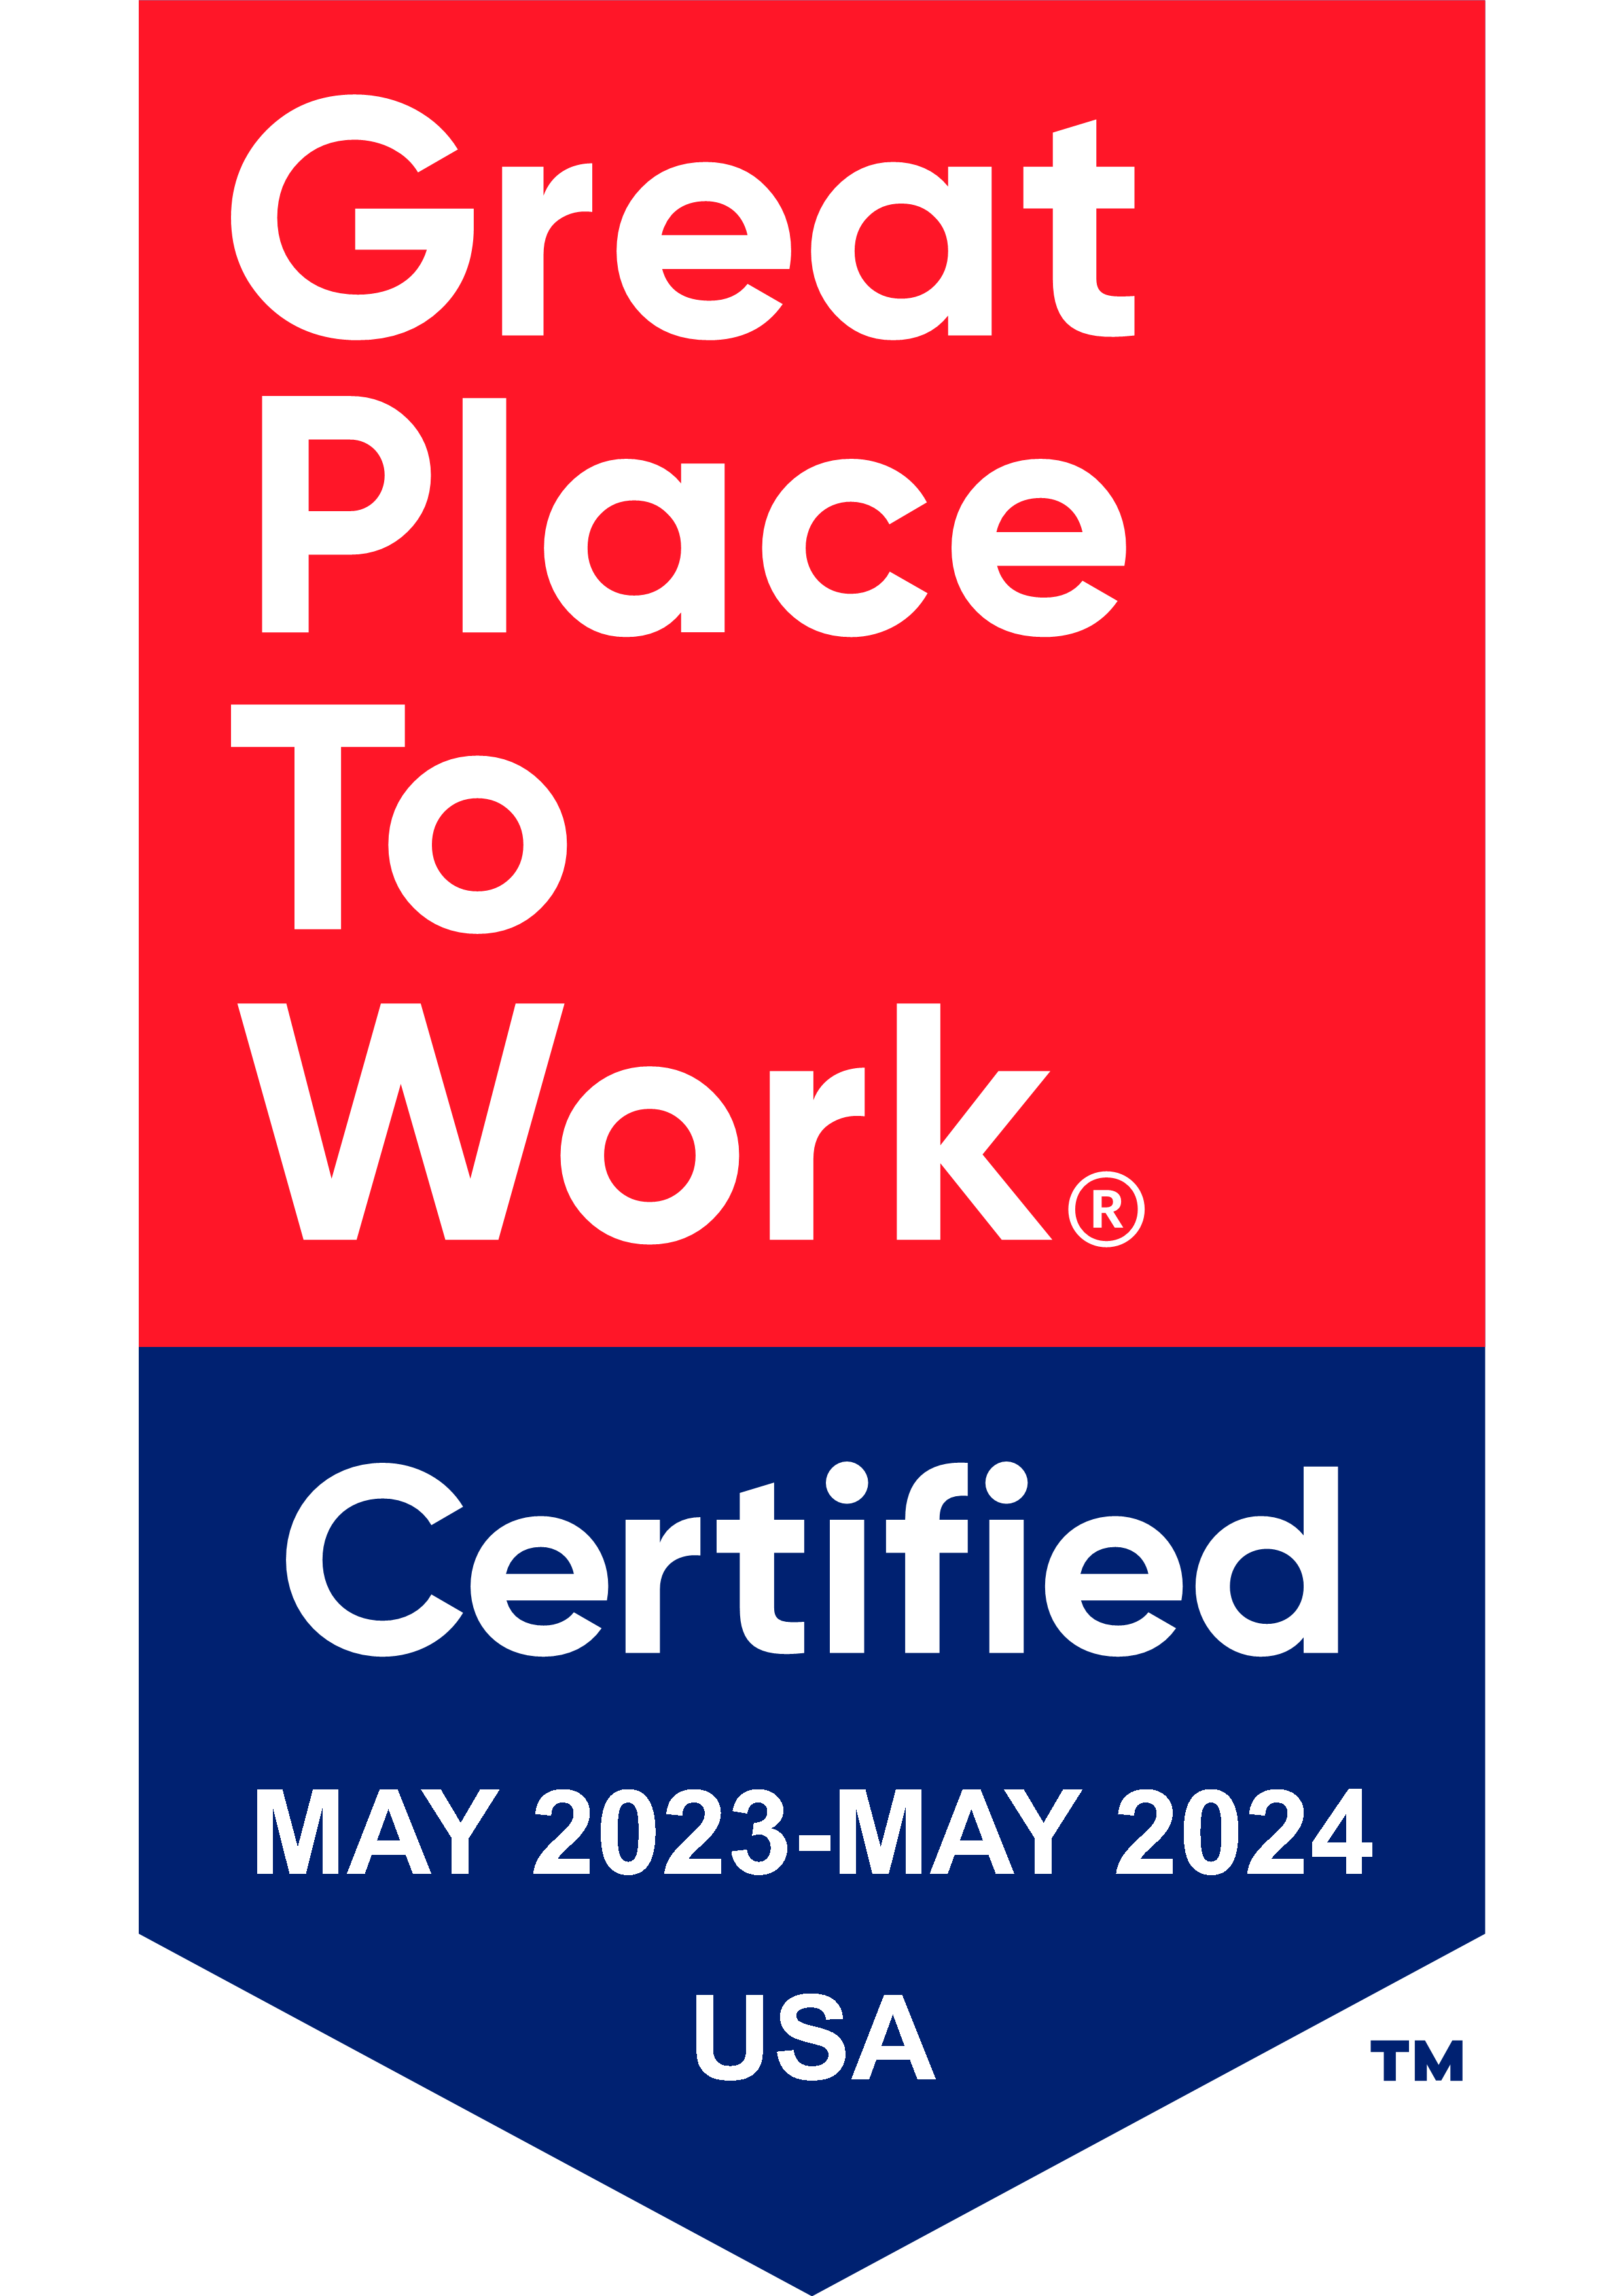 Great Place to Work Certification 2023-2024